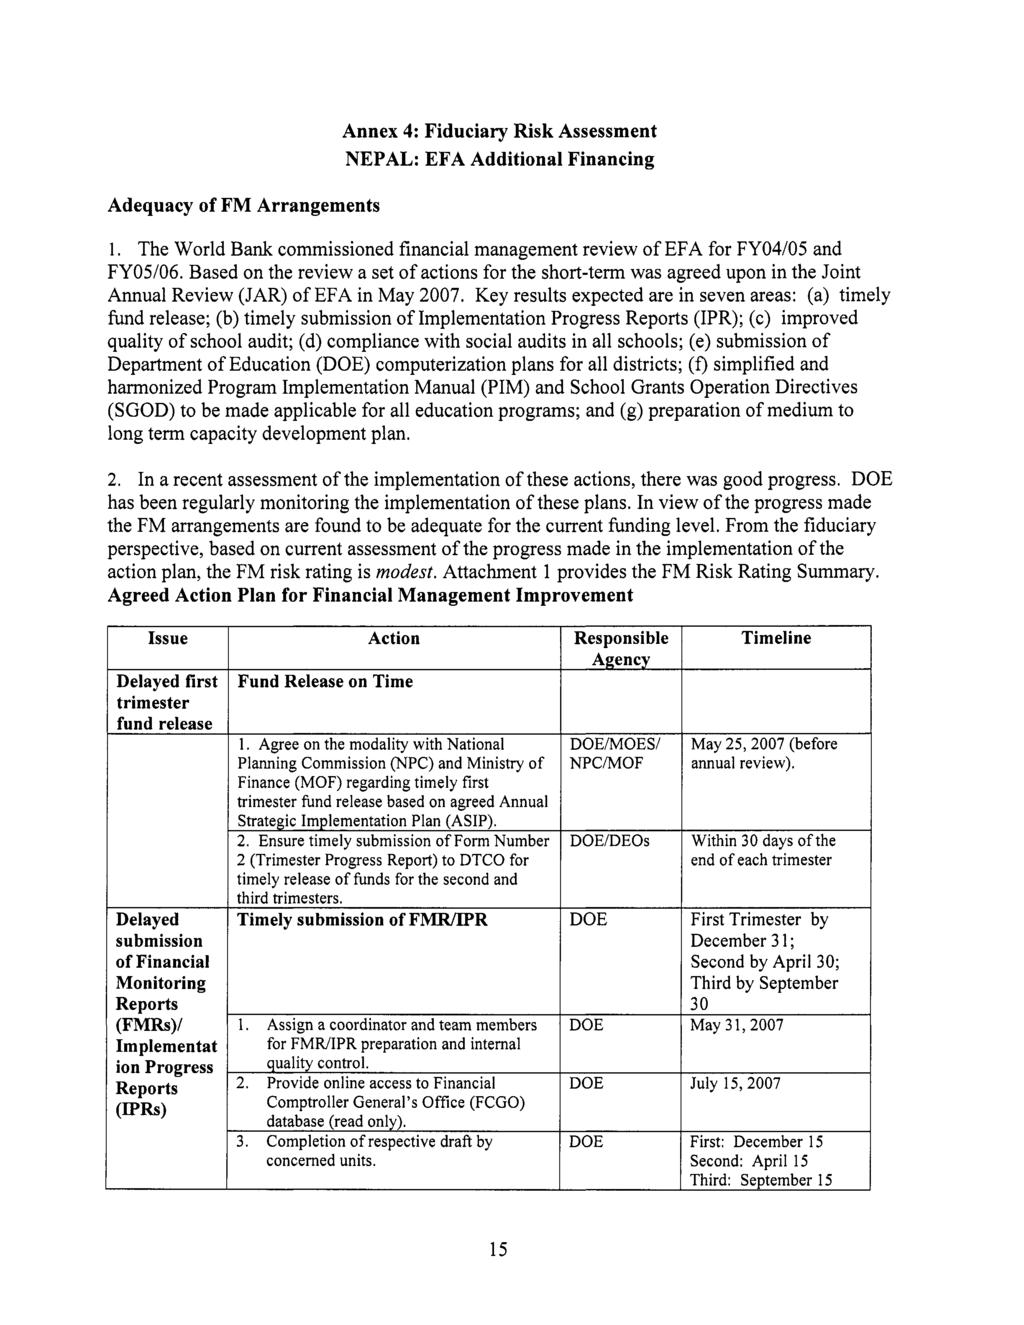 Adequacy of FM Arrangements Annex 4: Fiduciary Risk Assessment NEPAL: EFA Additional Financing 1. The World Bank commissioned financial management review of EFA for FY04/05 and FY05/06.